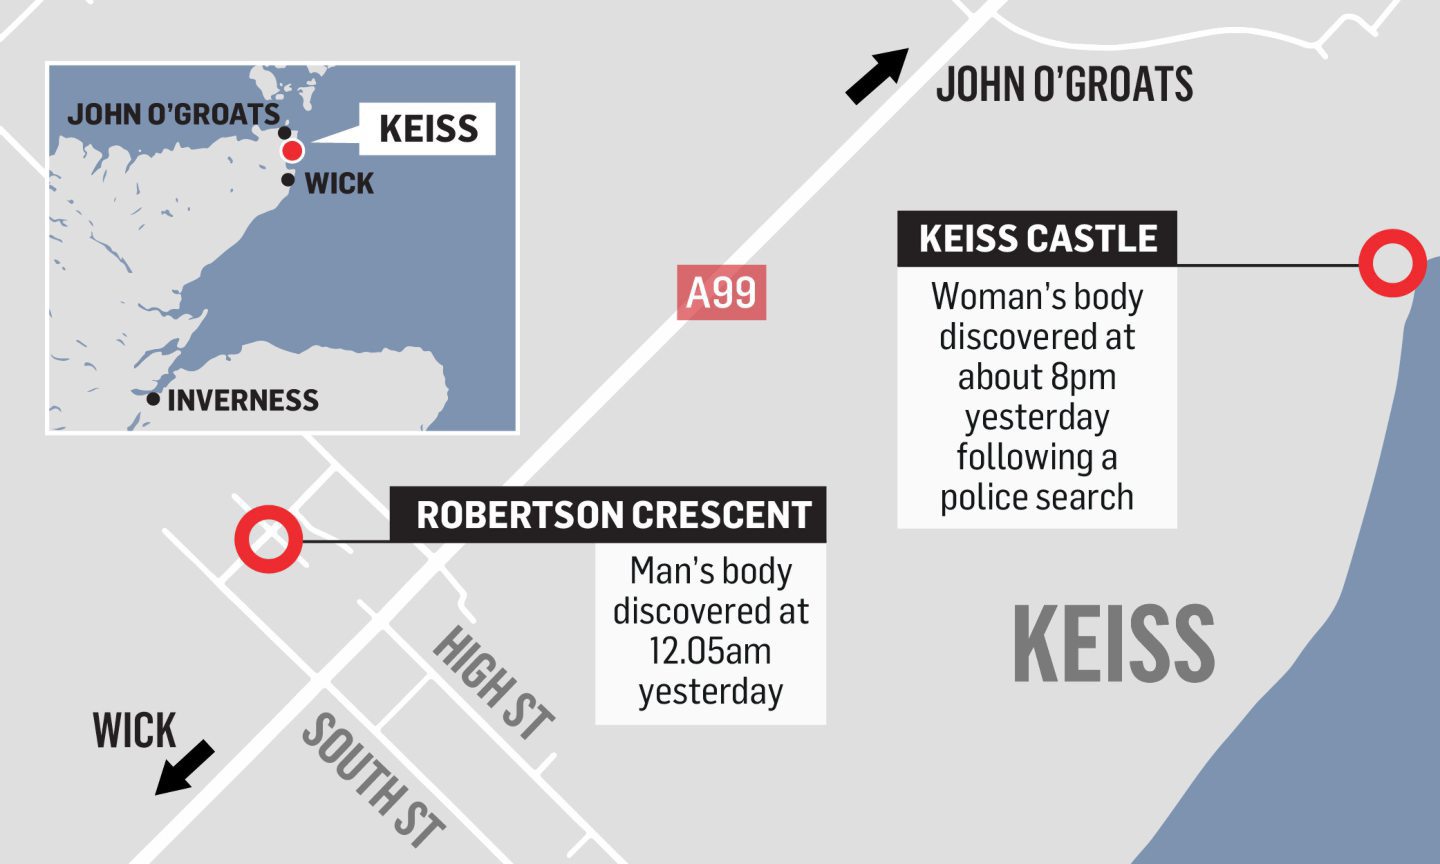 Map of Keiss showling location man's body found on Robertson Crescent and Keiss Castle where woman's body was found. 